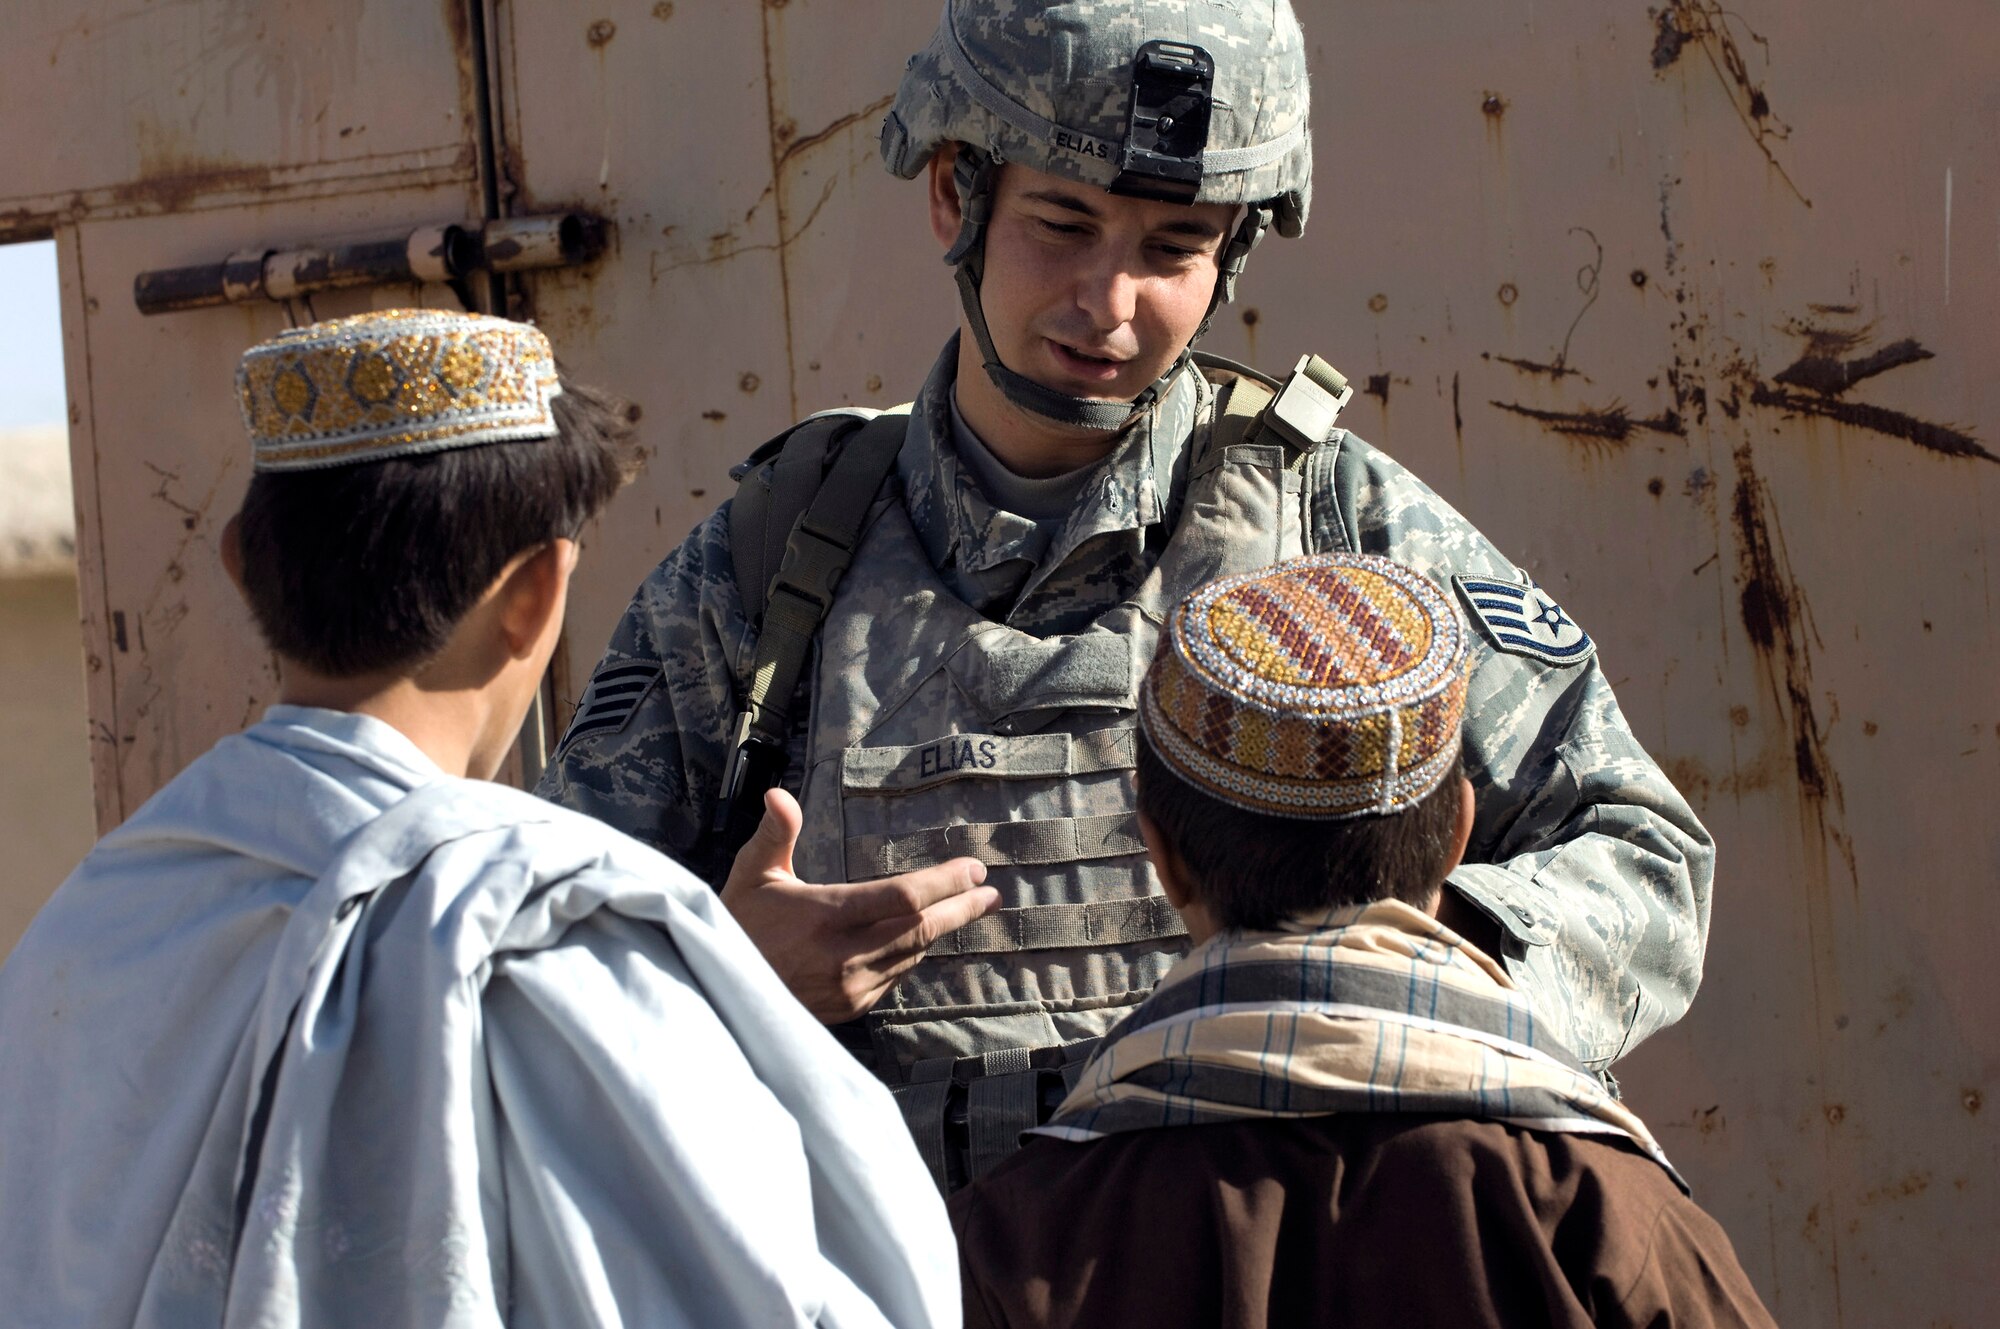 Staff Sgt. Don Elias talks with two Afghan boys while providing security during a veterinary outreach held by the Zabul Provincial Reconstruction Team Oct. 17 in Qalat, Afghanistan. The team provided free treatment to the nomadic Kuchi tribe's livestock. Sergeant Elias is deployed to the PRT as the force protection NCO in charge from Wright-Patterson Air Force Base, Ohio. He is a native of Buffalo, N.Y. (U.S. Air Force photo/Master Sgt. Keith Brown) 
